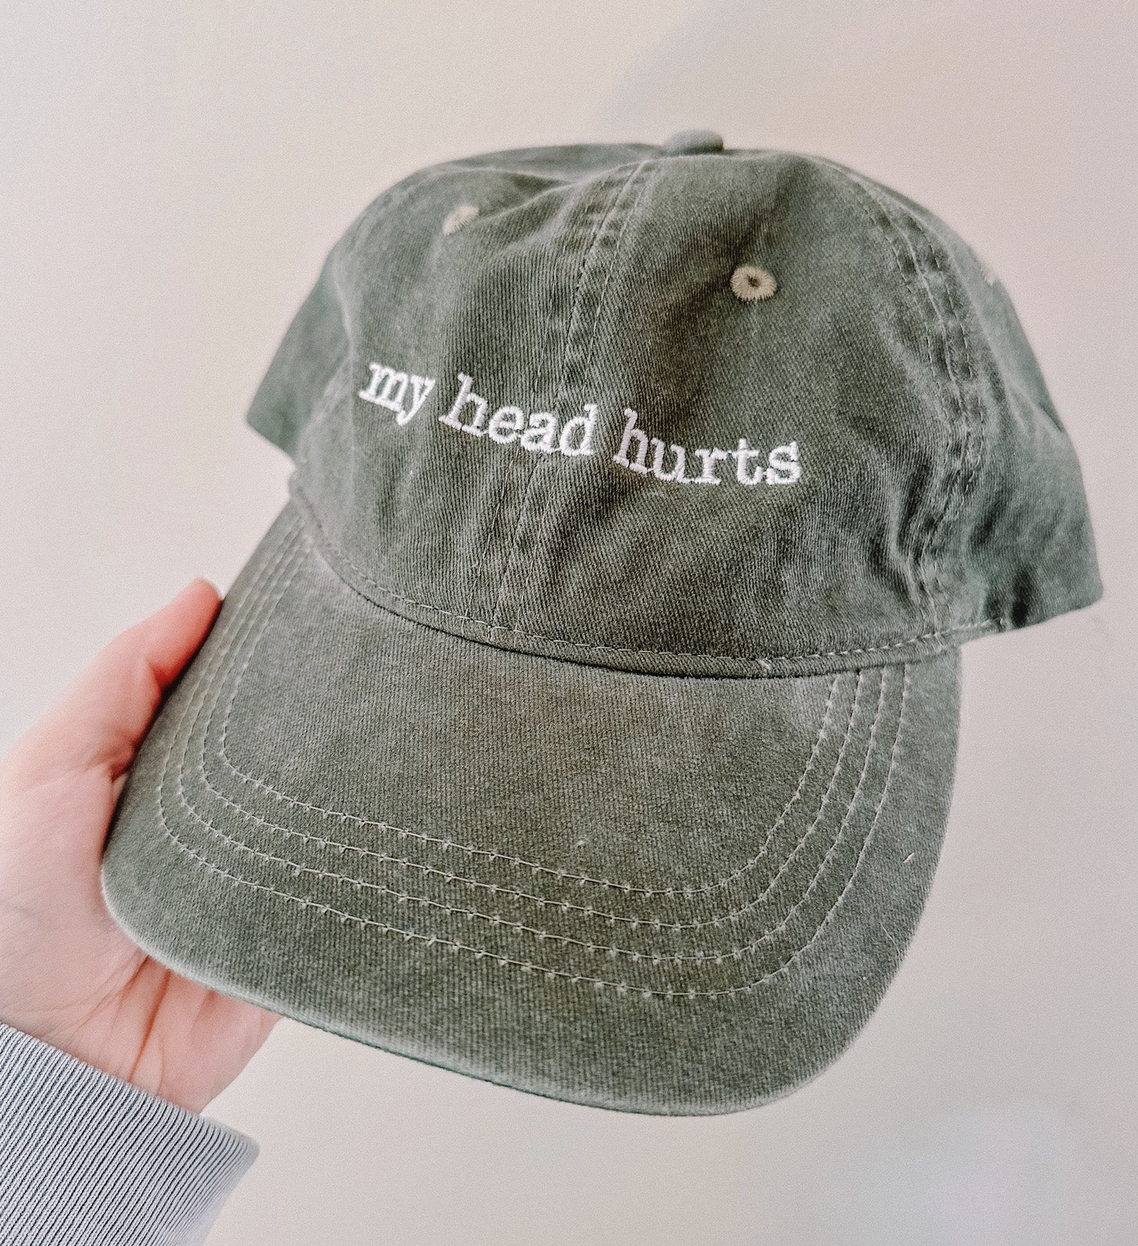 My Head Hurts Embroidered Hat (2 Colors Available)